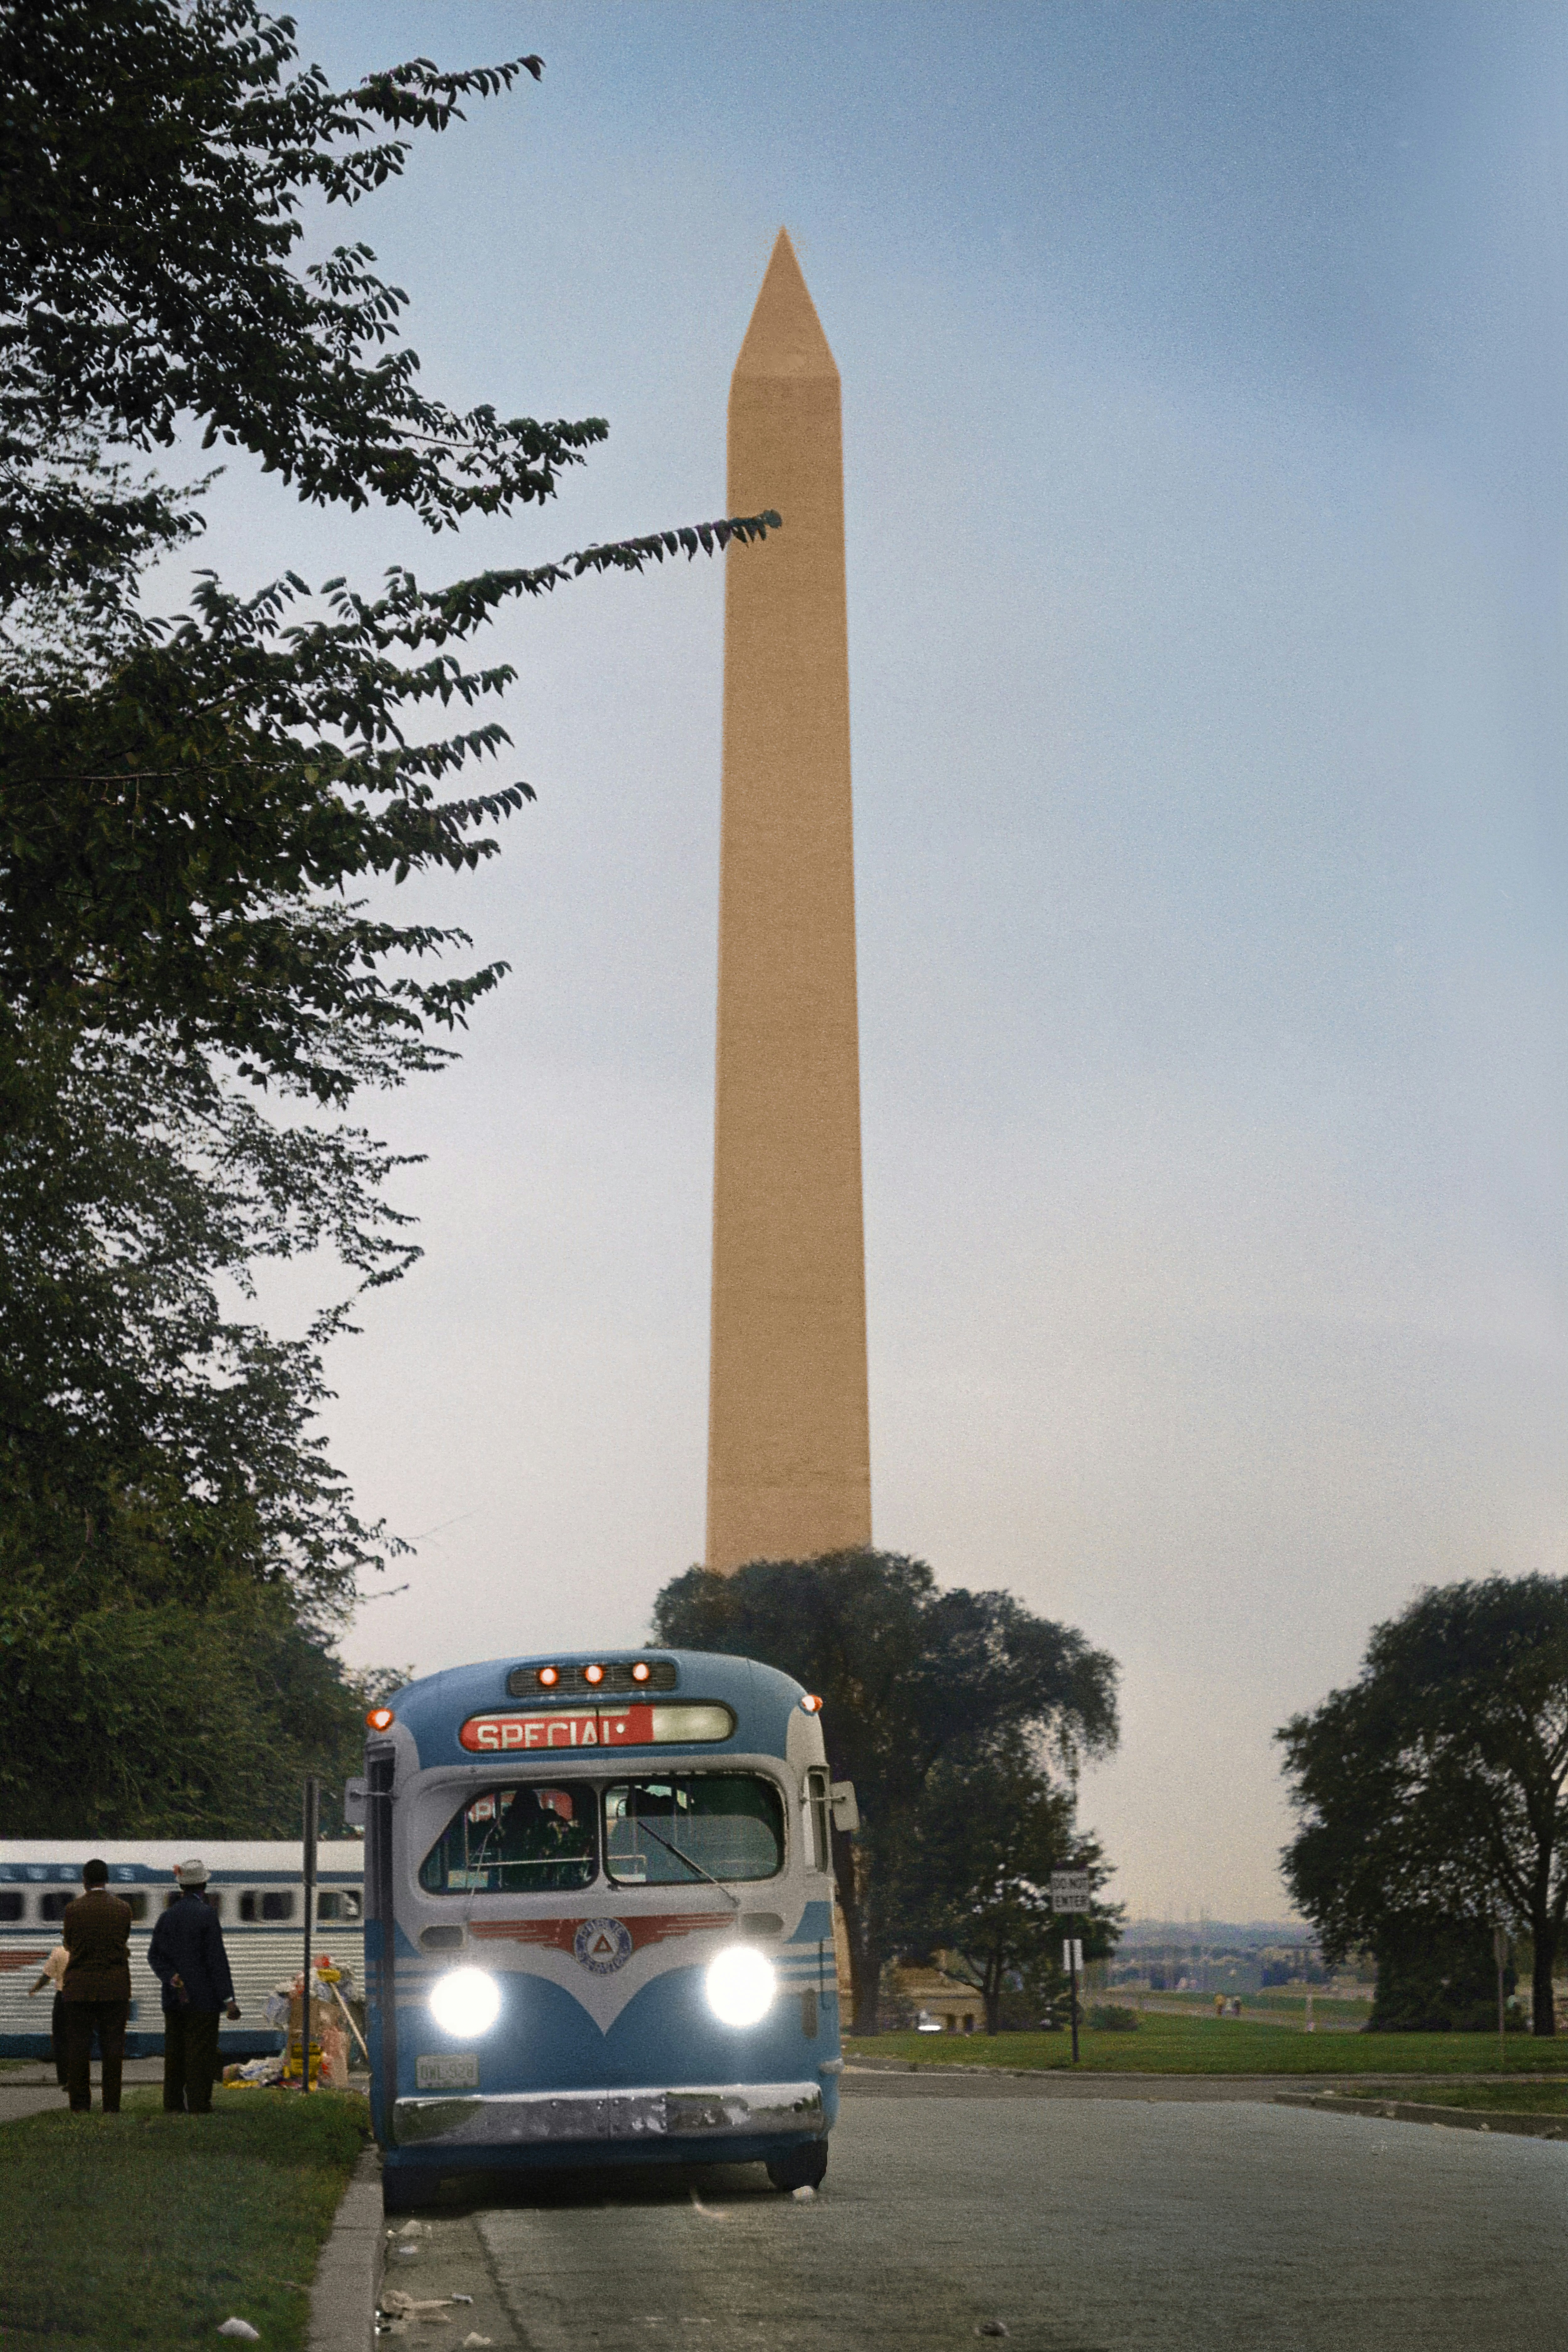 Caption reads, "[Bus leaving near the Washington Monument, after the March on Washington, 1963] / MST." Original black and white negative by Marion S. Trikosko. Taken August 28th, 1963, Washington D.C, United States (@libraryofcongress). Colorized by Jordan J. Lloyd. Library of Congress Prints and Photographs Division Washington, D.C. 20540 USA https://www.loc.gov/item/2011648313/